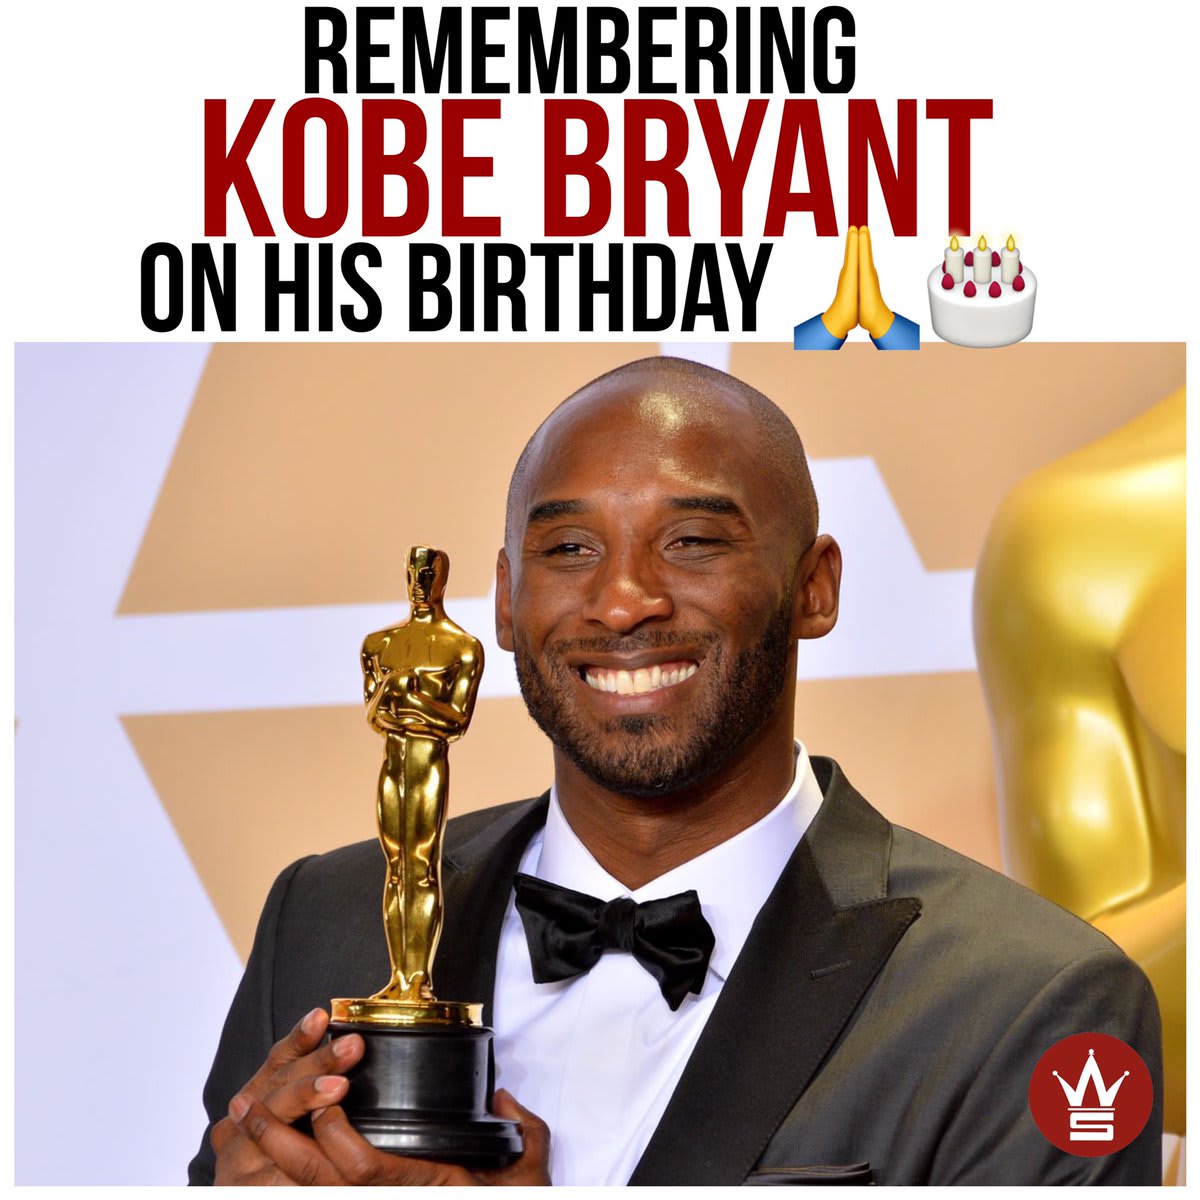 Today we remember the life of KobeBryant on his birthday. Our thoughts and prayers continue to be with his family and friends.